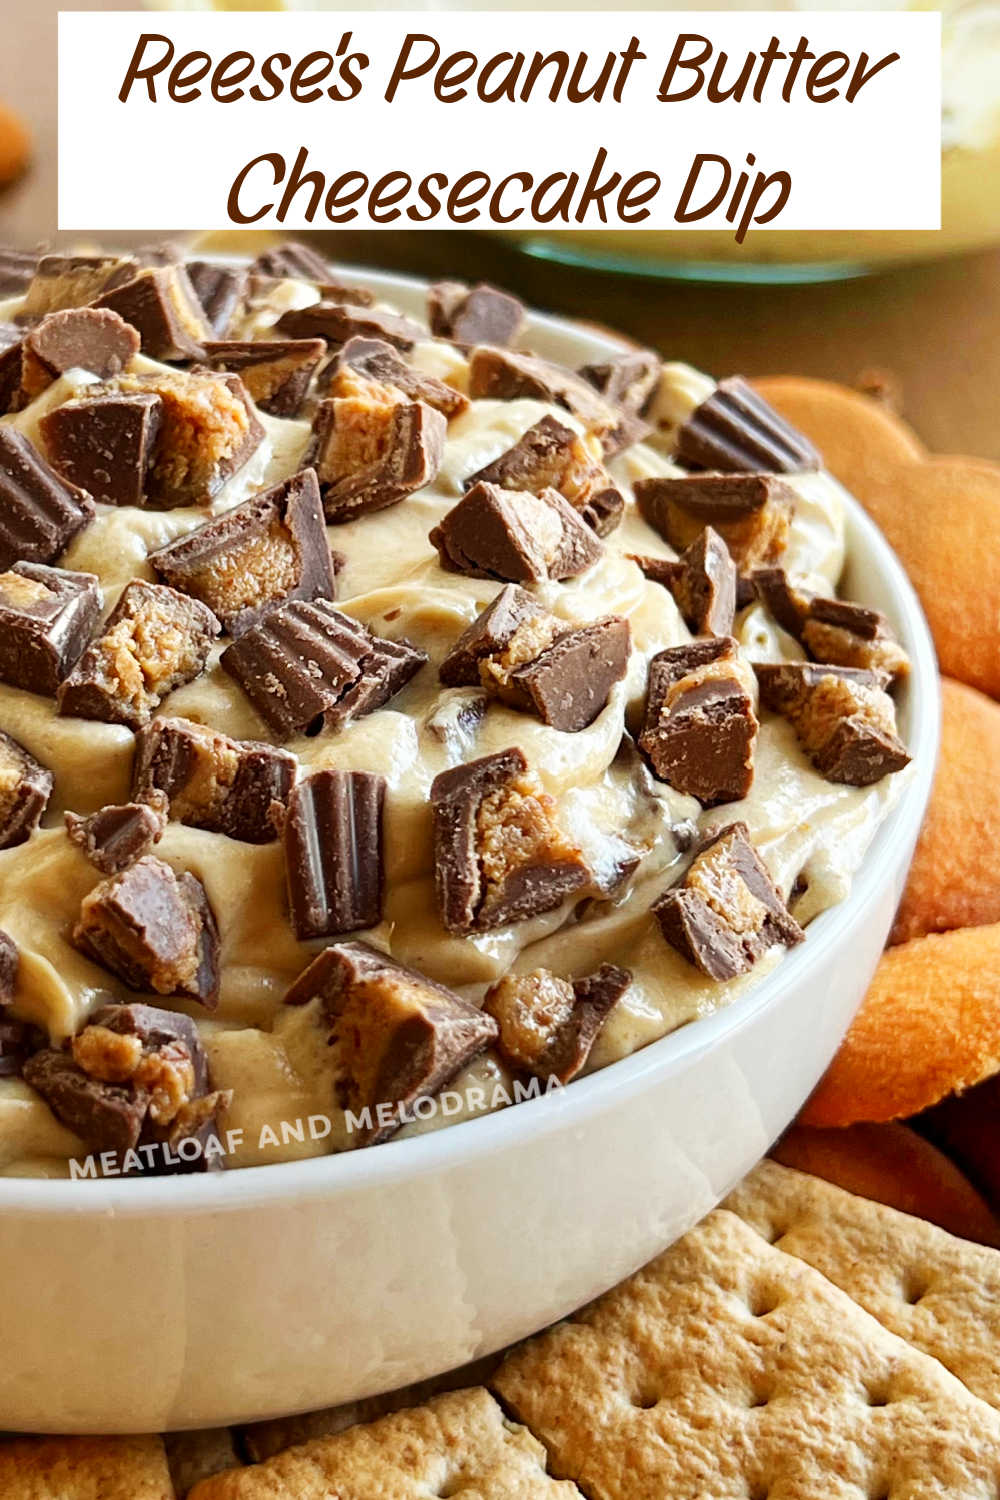 Peanut Butter Cheesecake Dip is a no bake dessert dip that tastes like a Reese's peanut butter cup in dip form. This easy recipe makes a delicious treat or party appetizer everyone loves! via @meamel